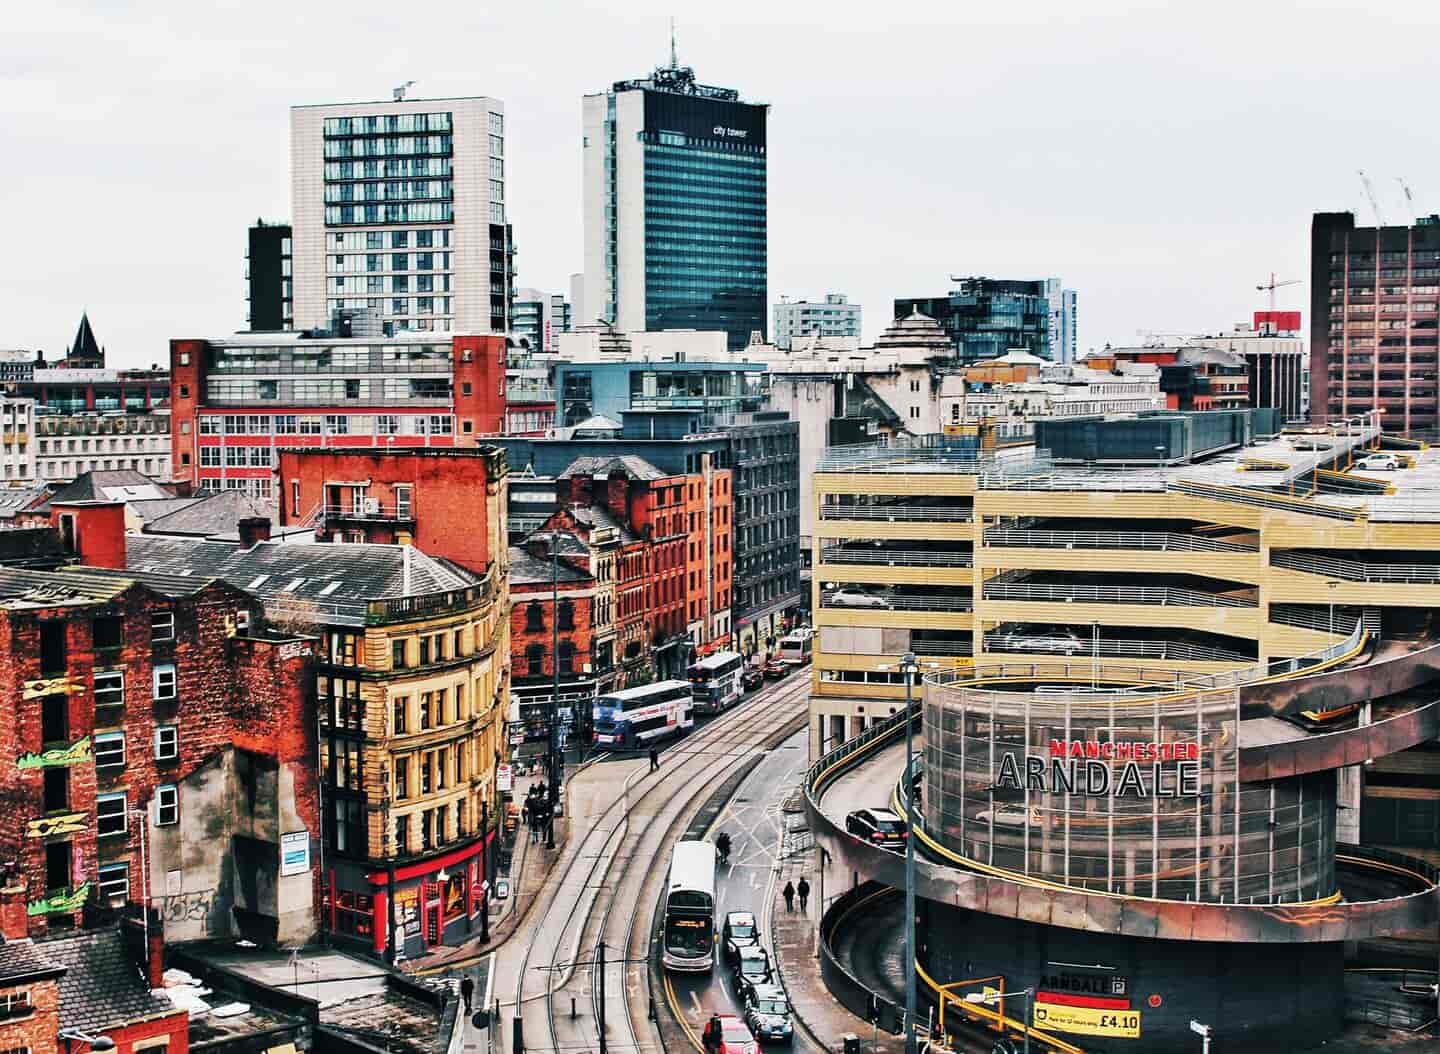 Student Accommodation in Manchester - A wet Manchester skyline with Manchester Arndale in view